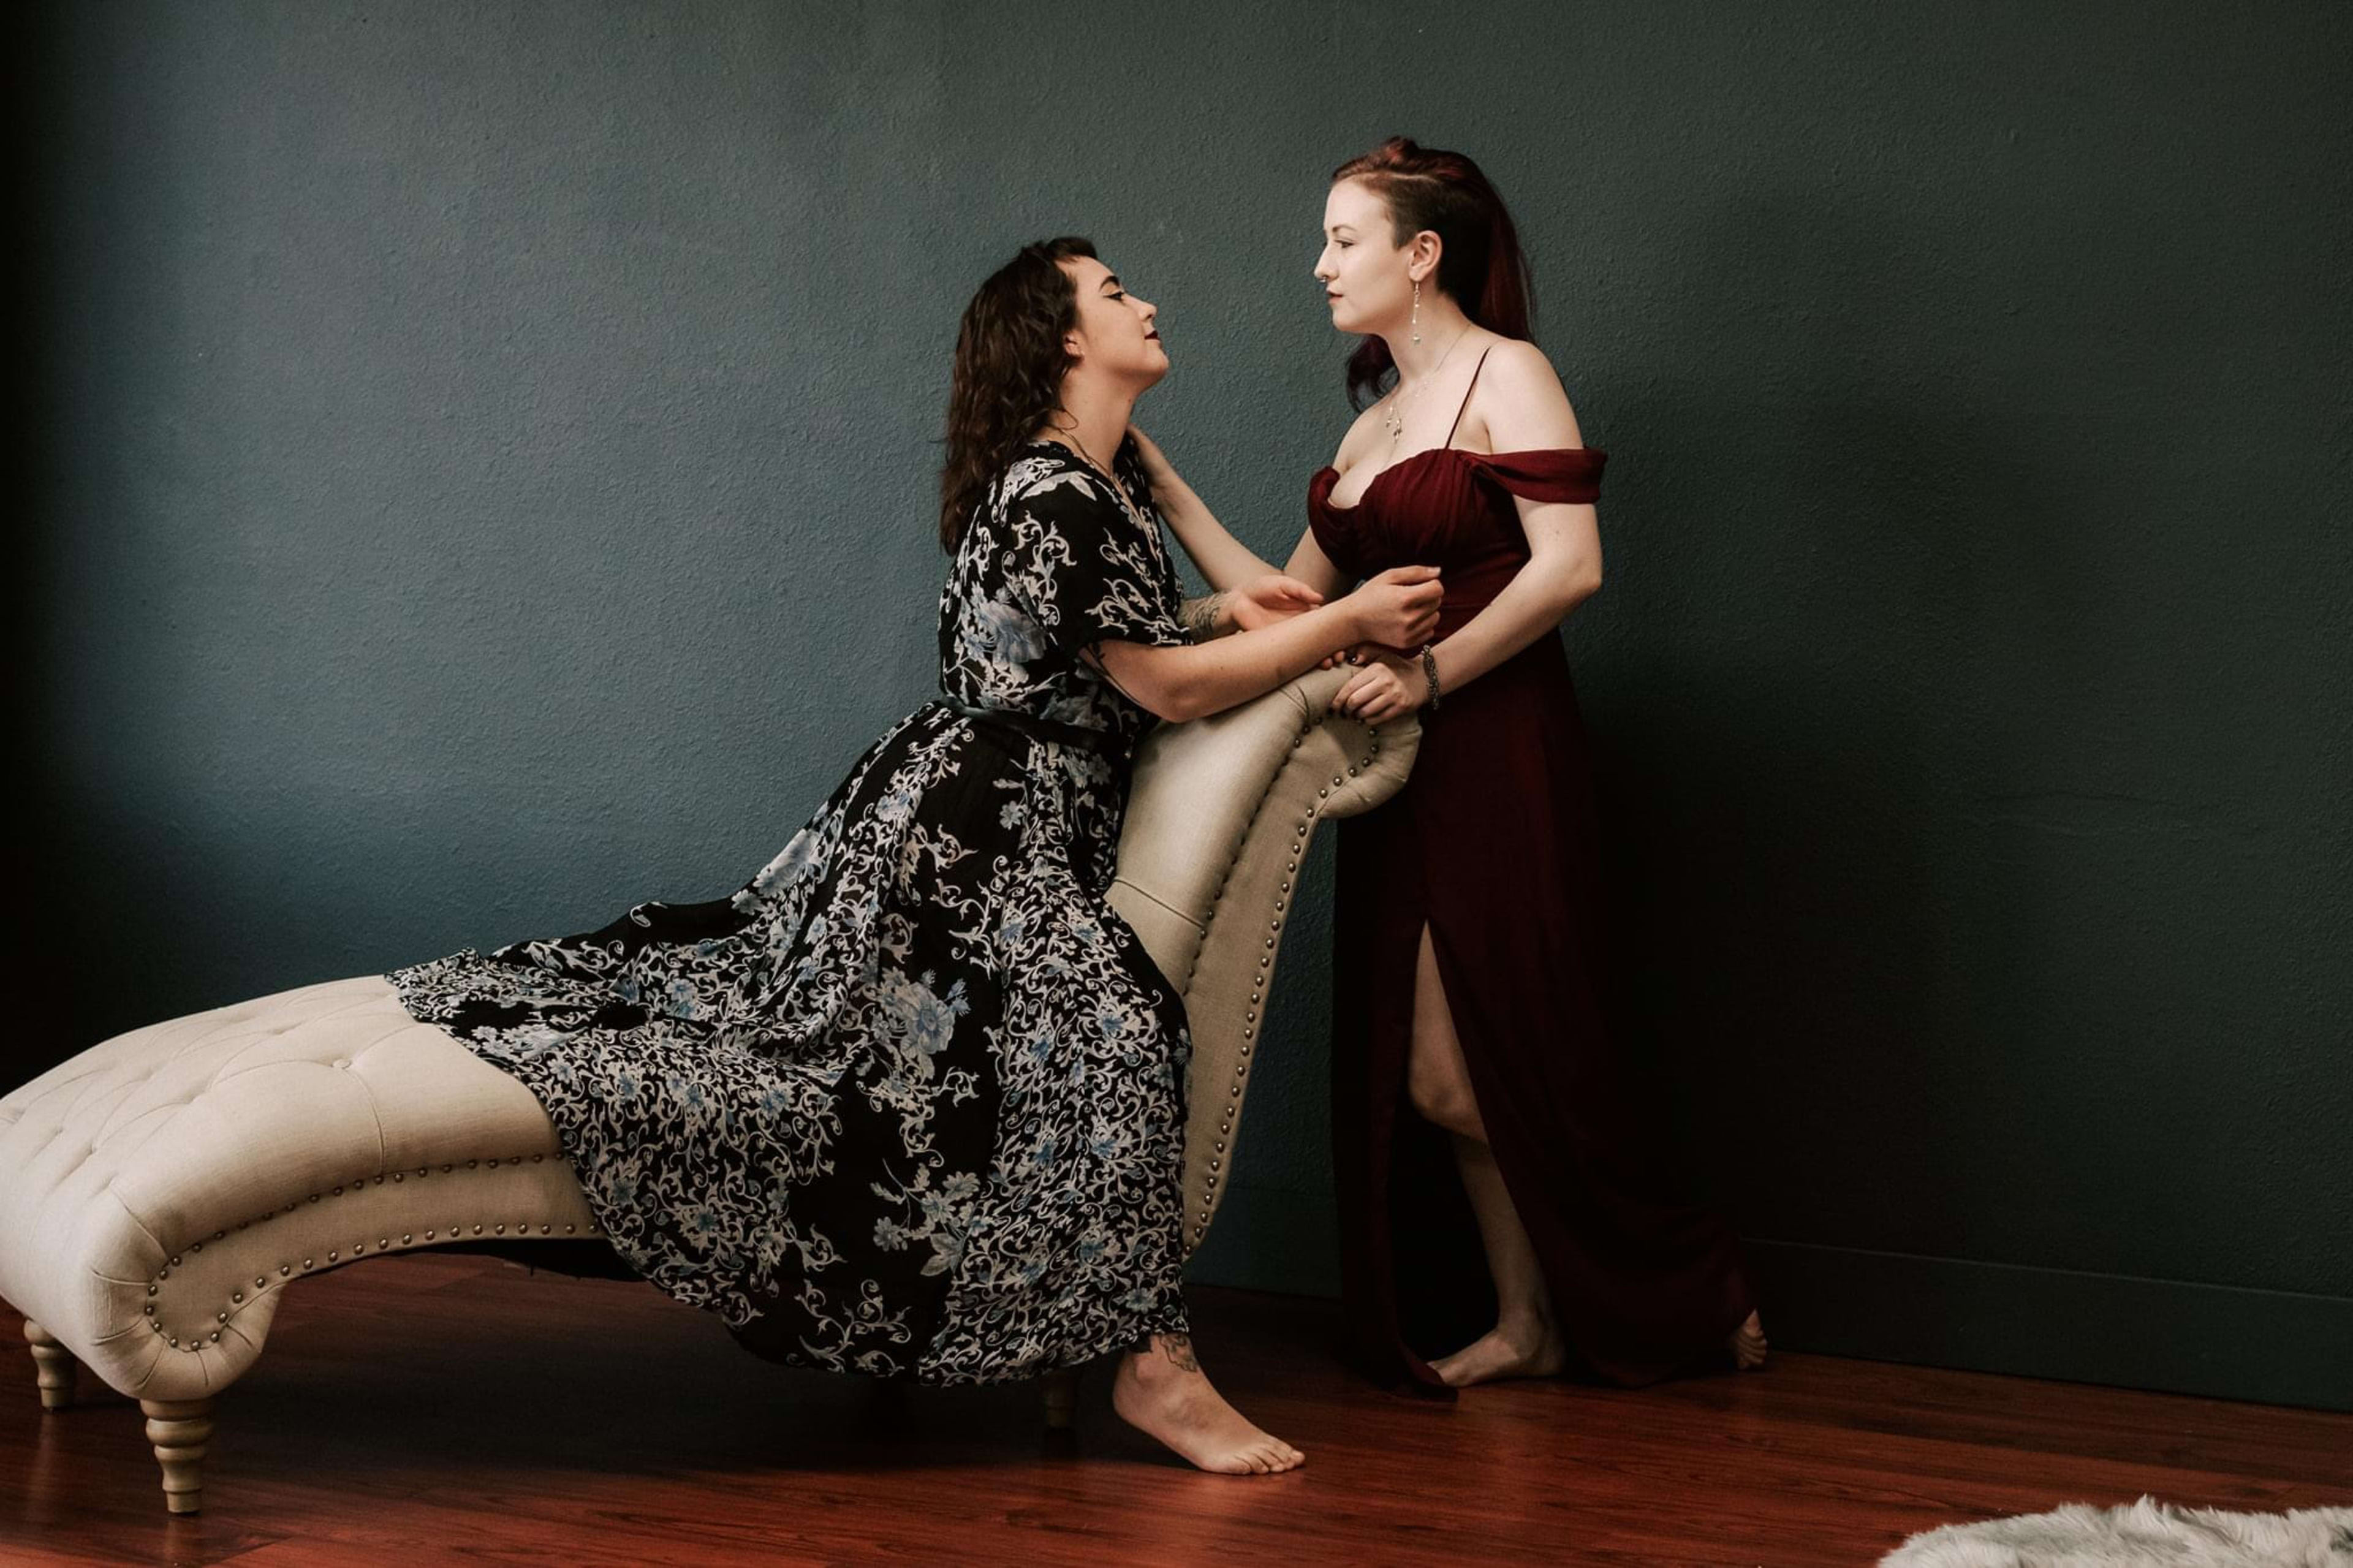 Two women are posing in a photoshoot.